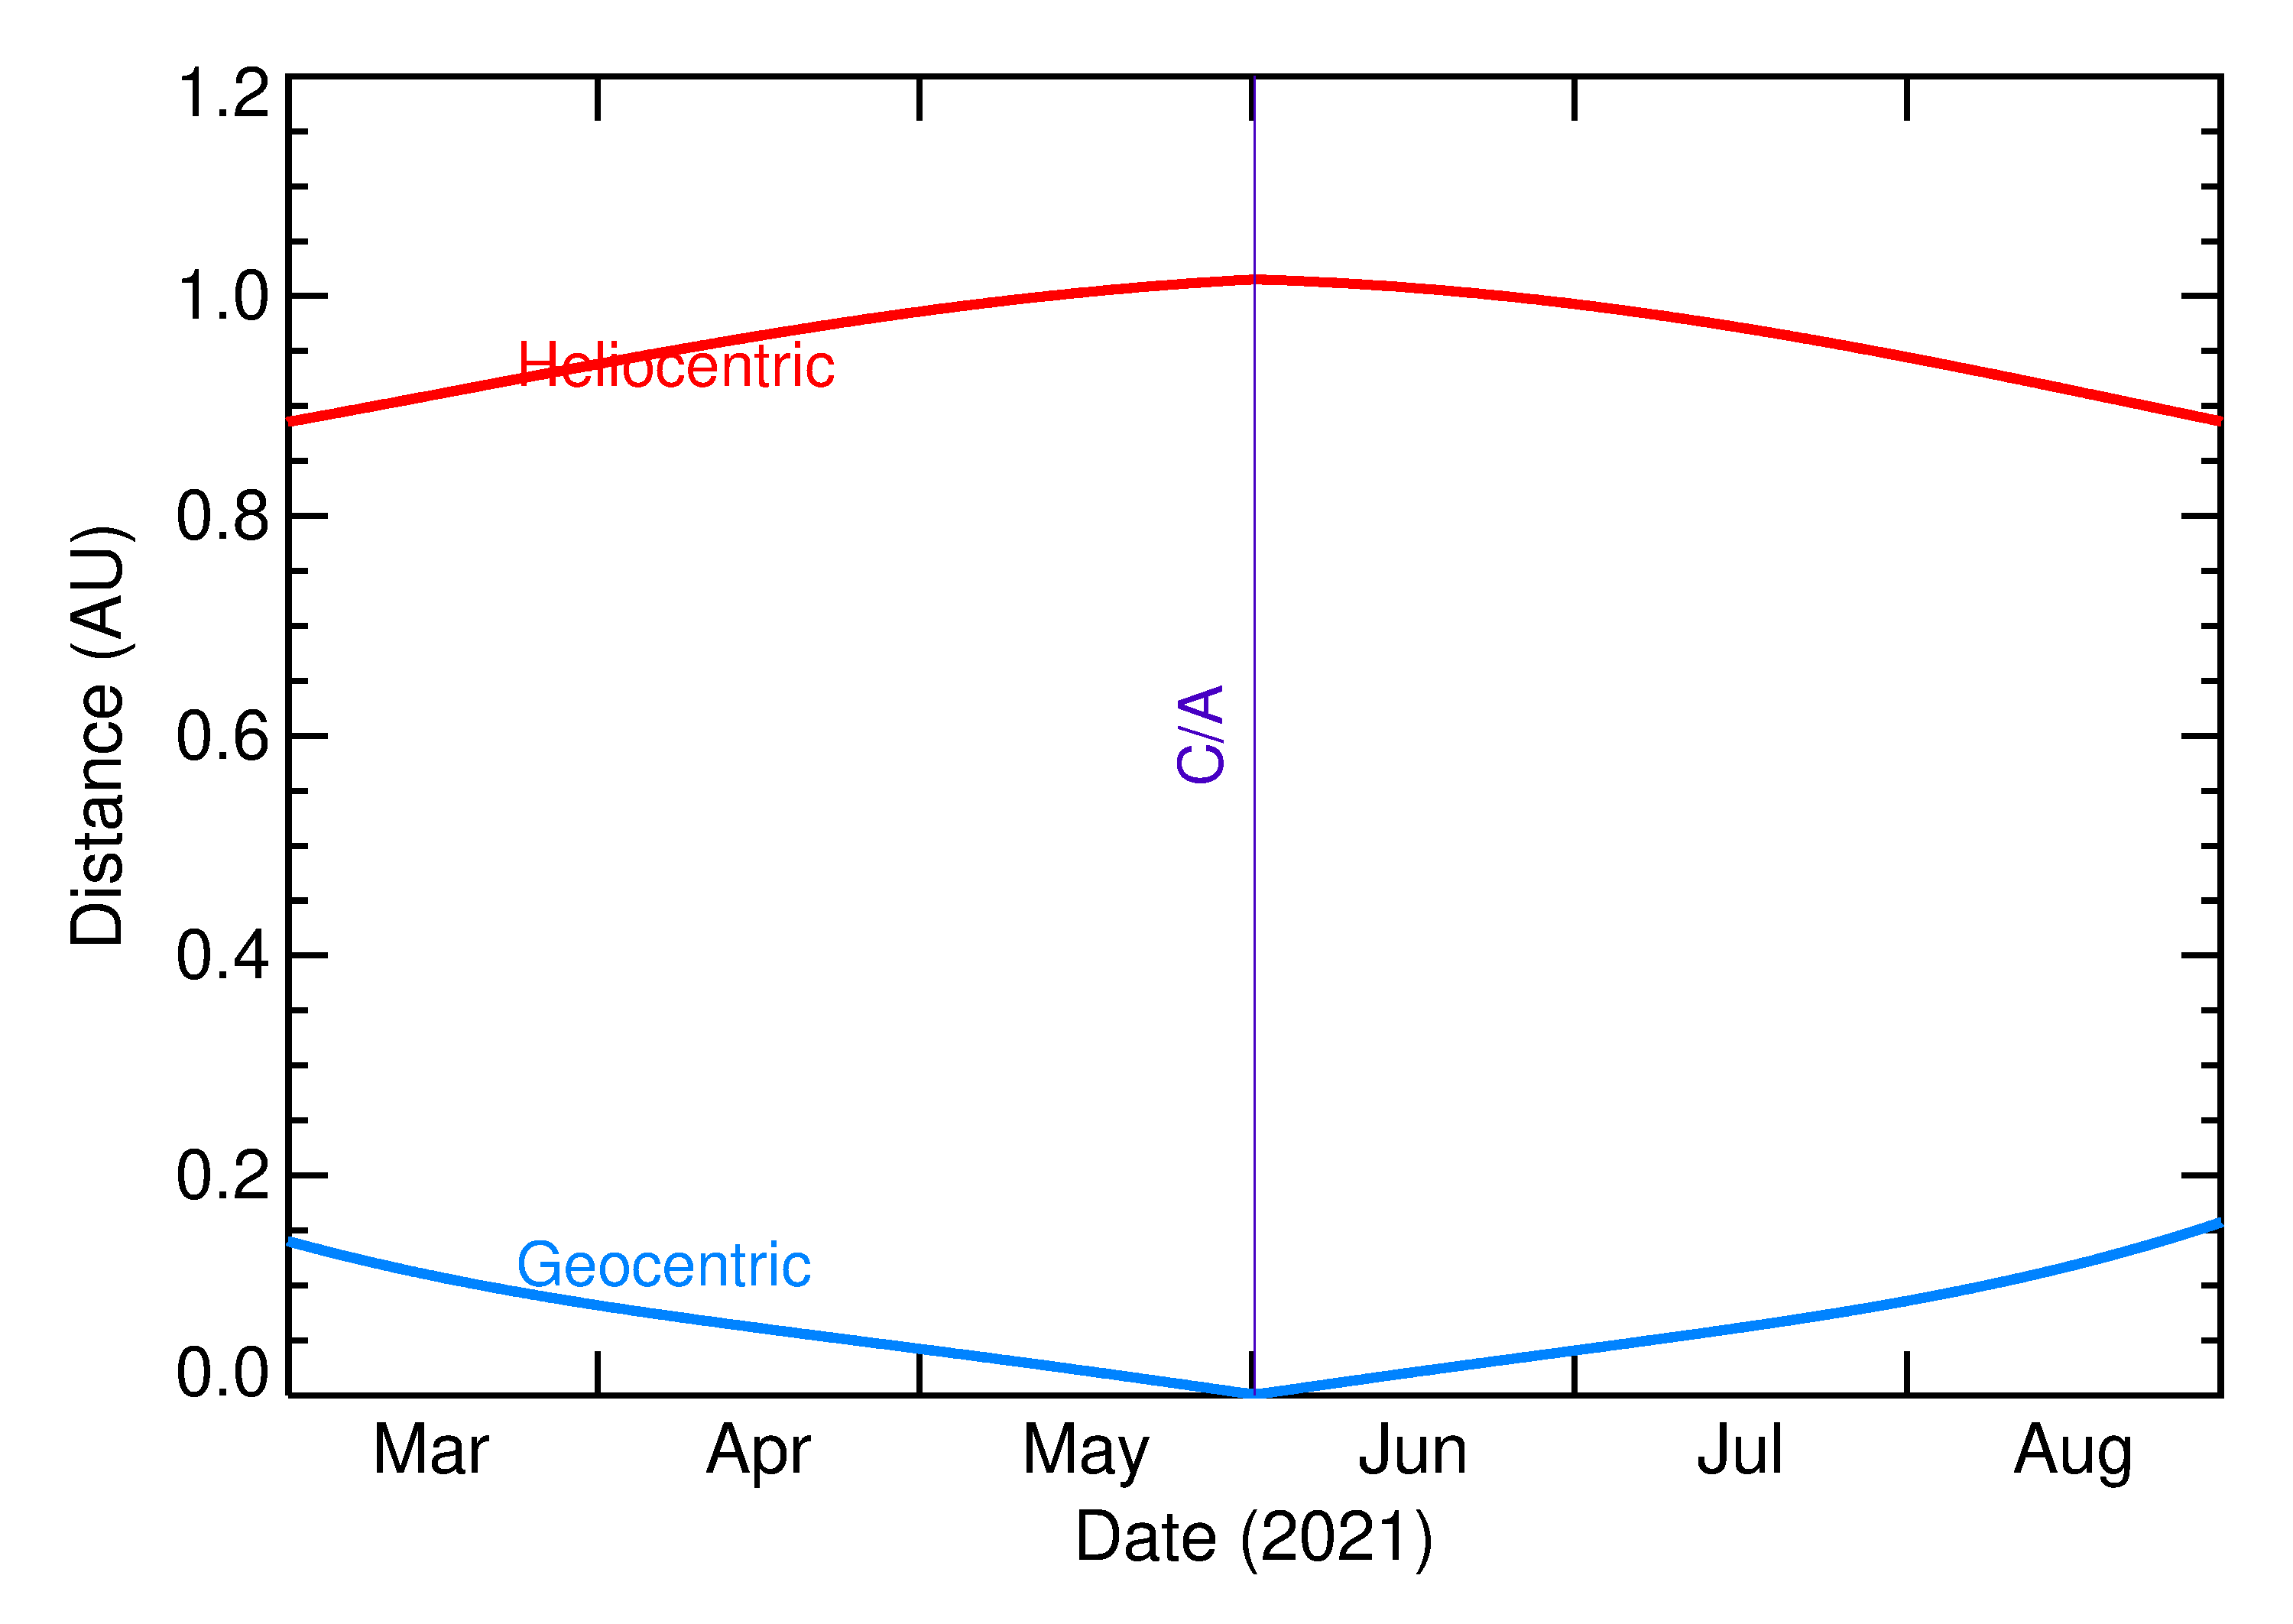 Heliocentric and Geocentric Distances of 2021 KQ2 in the months around closest approach